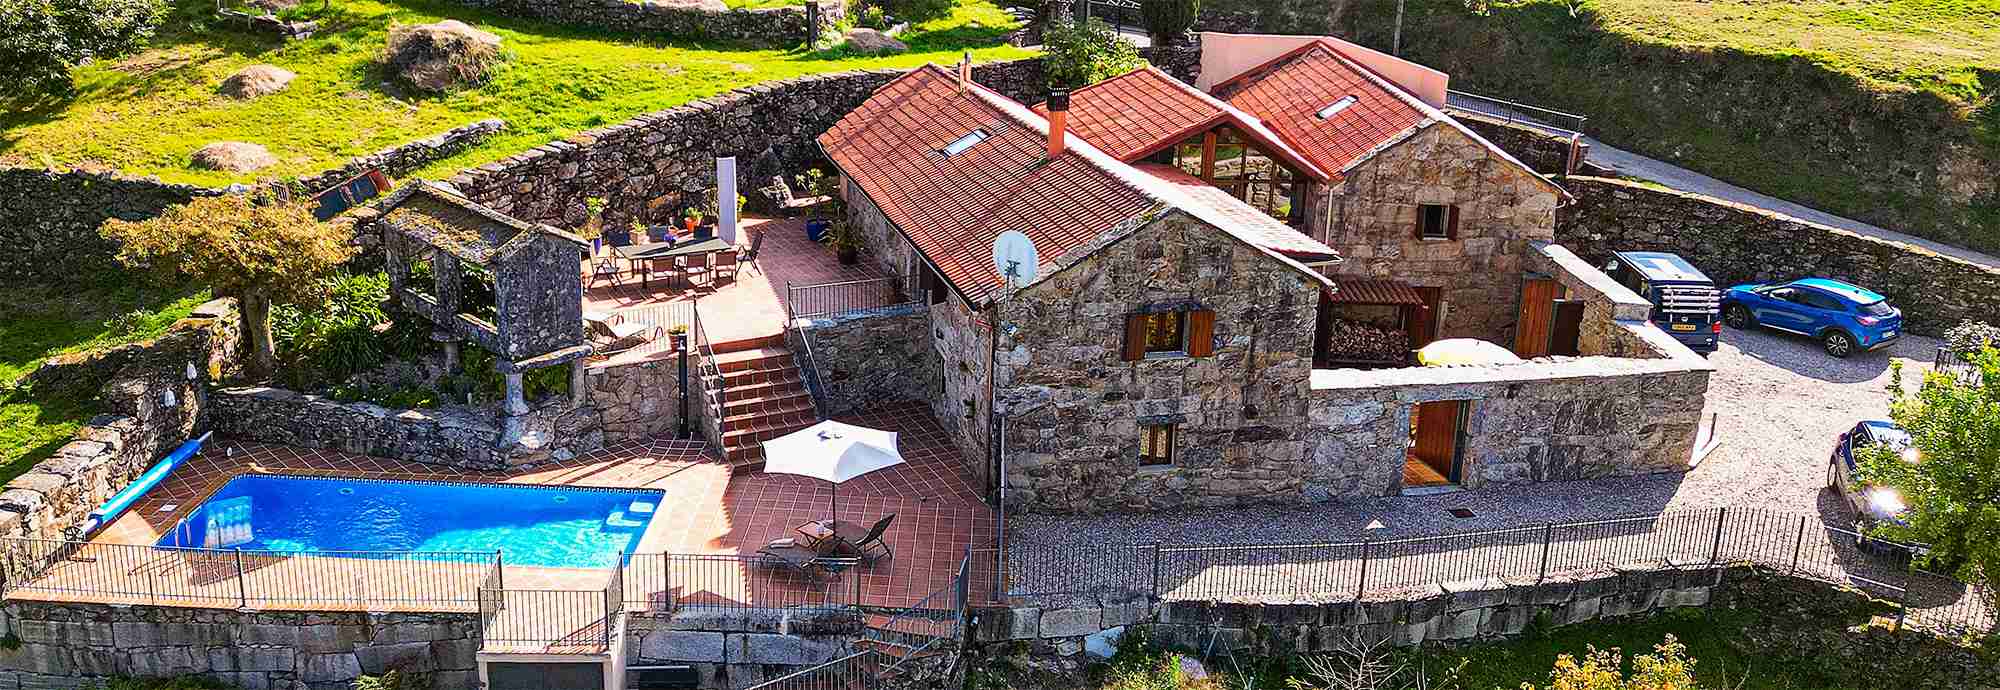 Quality Galicia villa with heated swimming pool in pretty rural location